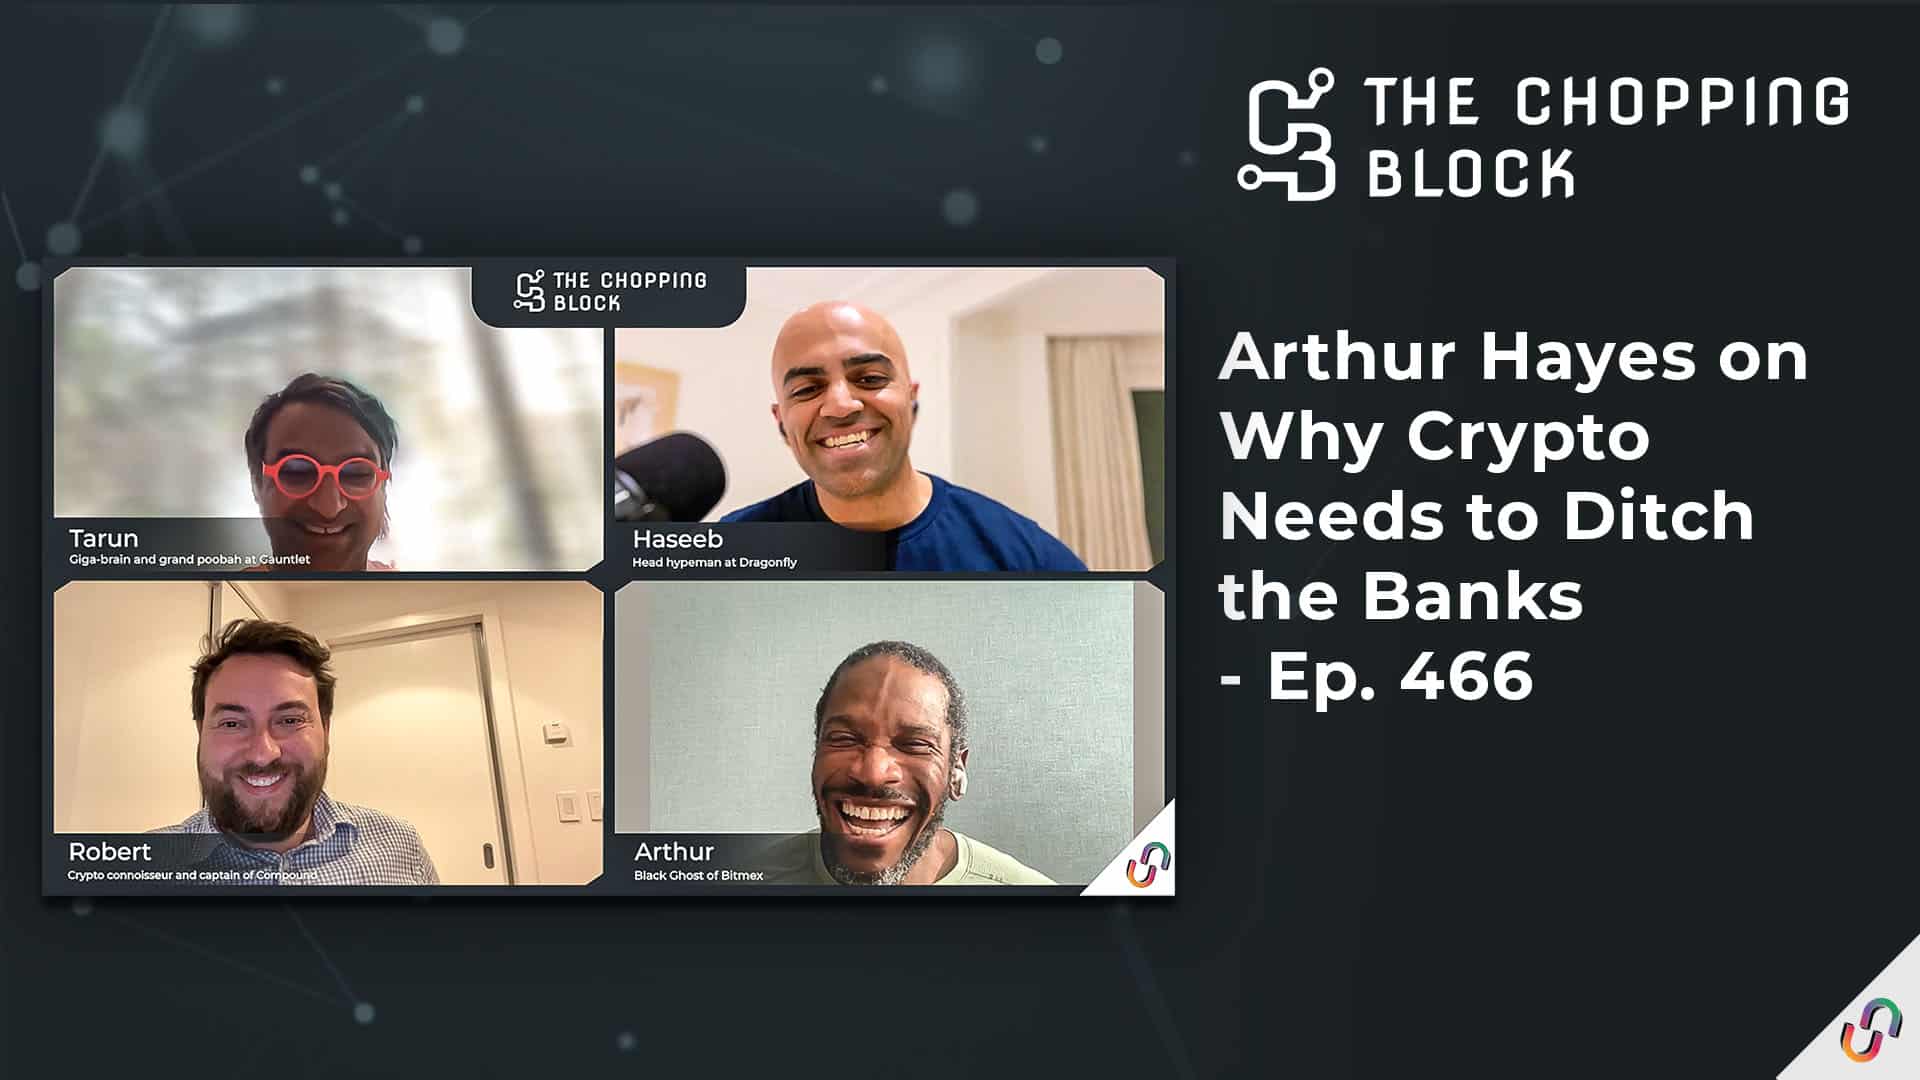 The Chopping Block: Arthur Hayes on Why Crypto Needs to Ditch the Banks - Ep. 466